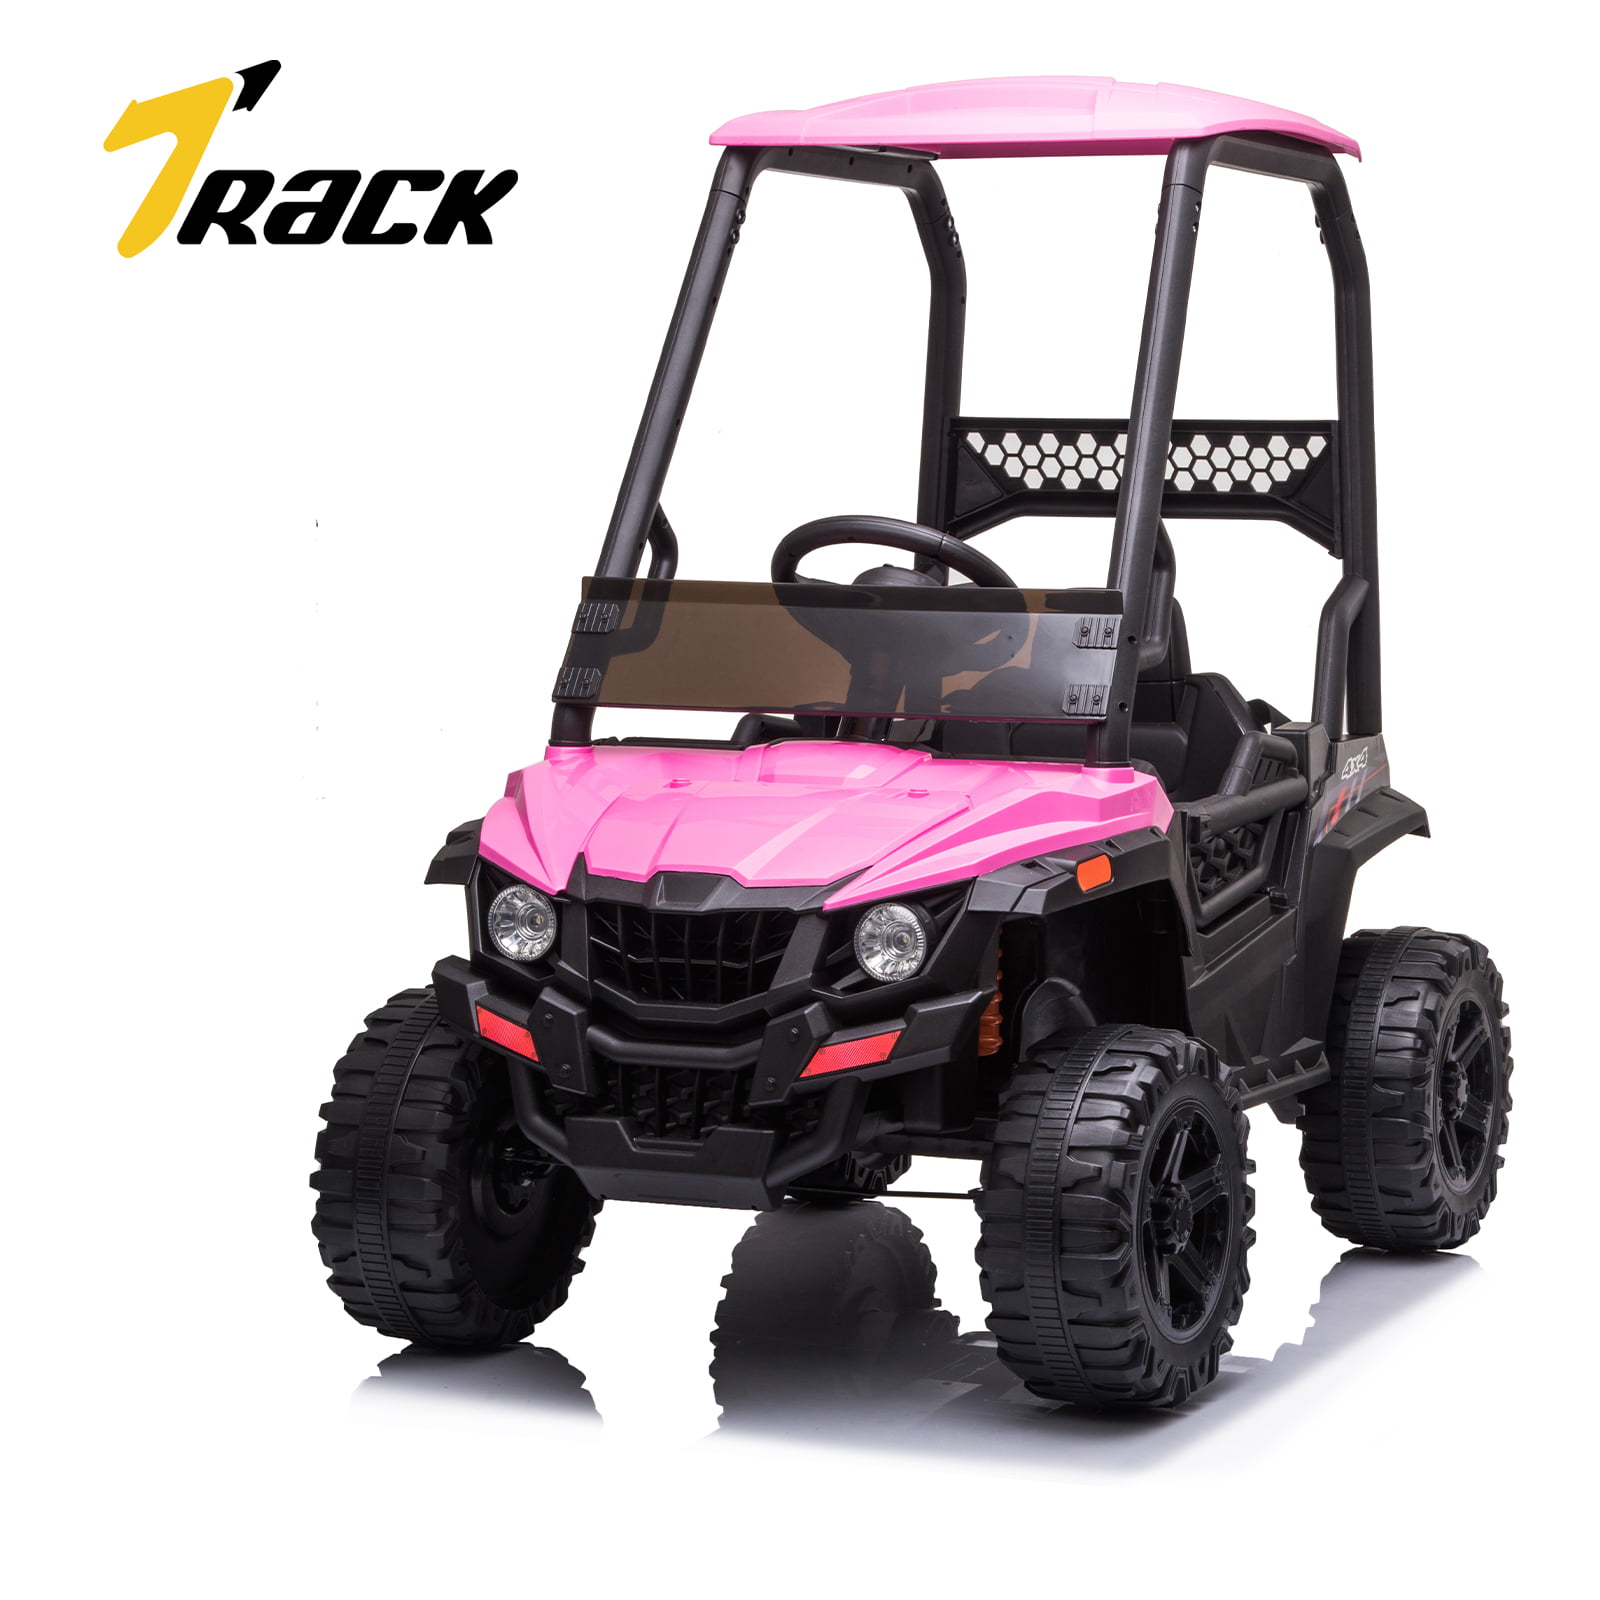 Kids Electric Rzr Ride On Car 24v Power Utv 2021 Mp3 Electric 1-8mph Fast Buggy 